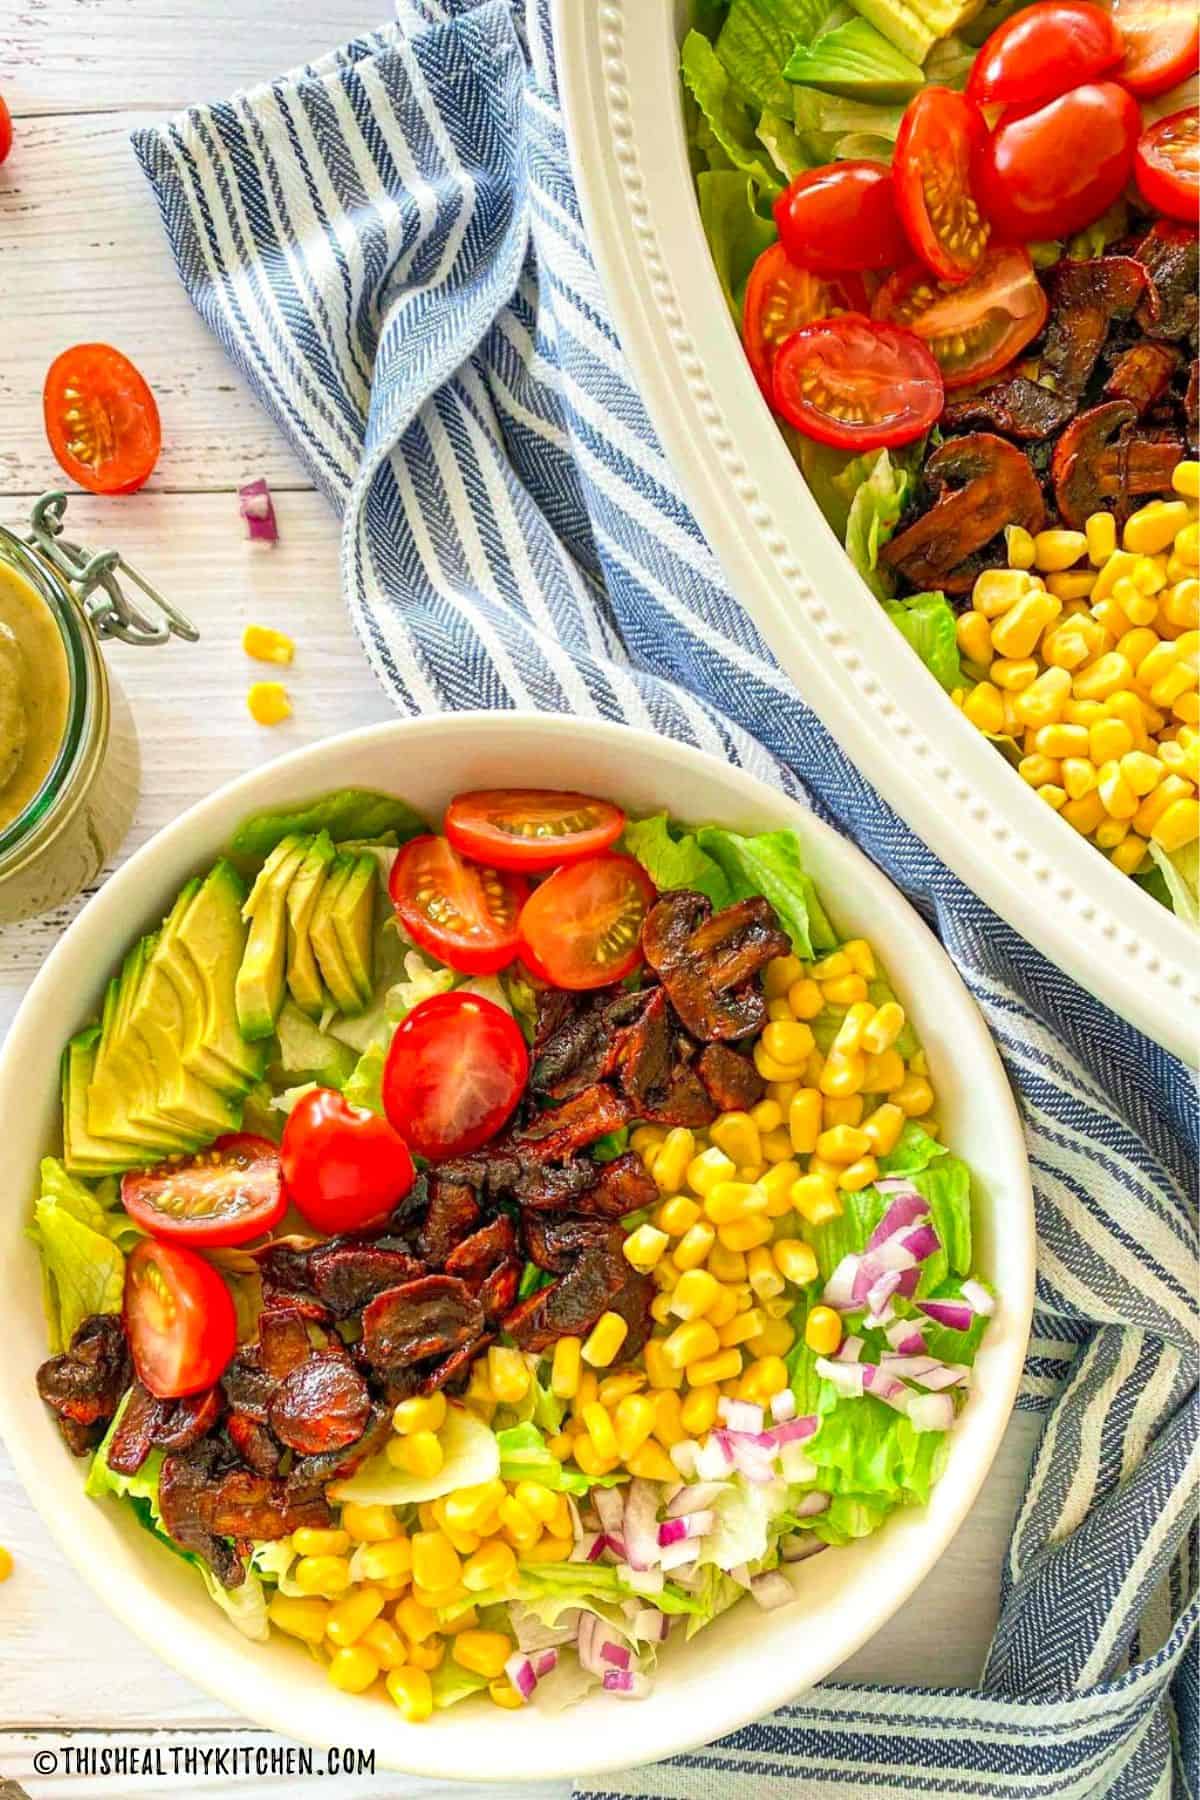 Salad with red onion, corn, mushrooms, tomatoes, and avocado on top.